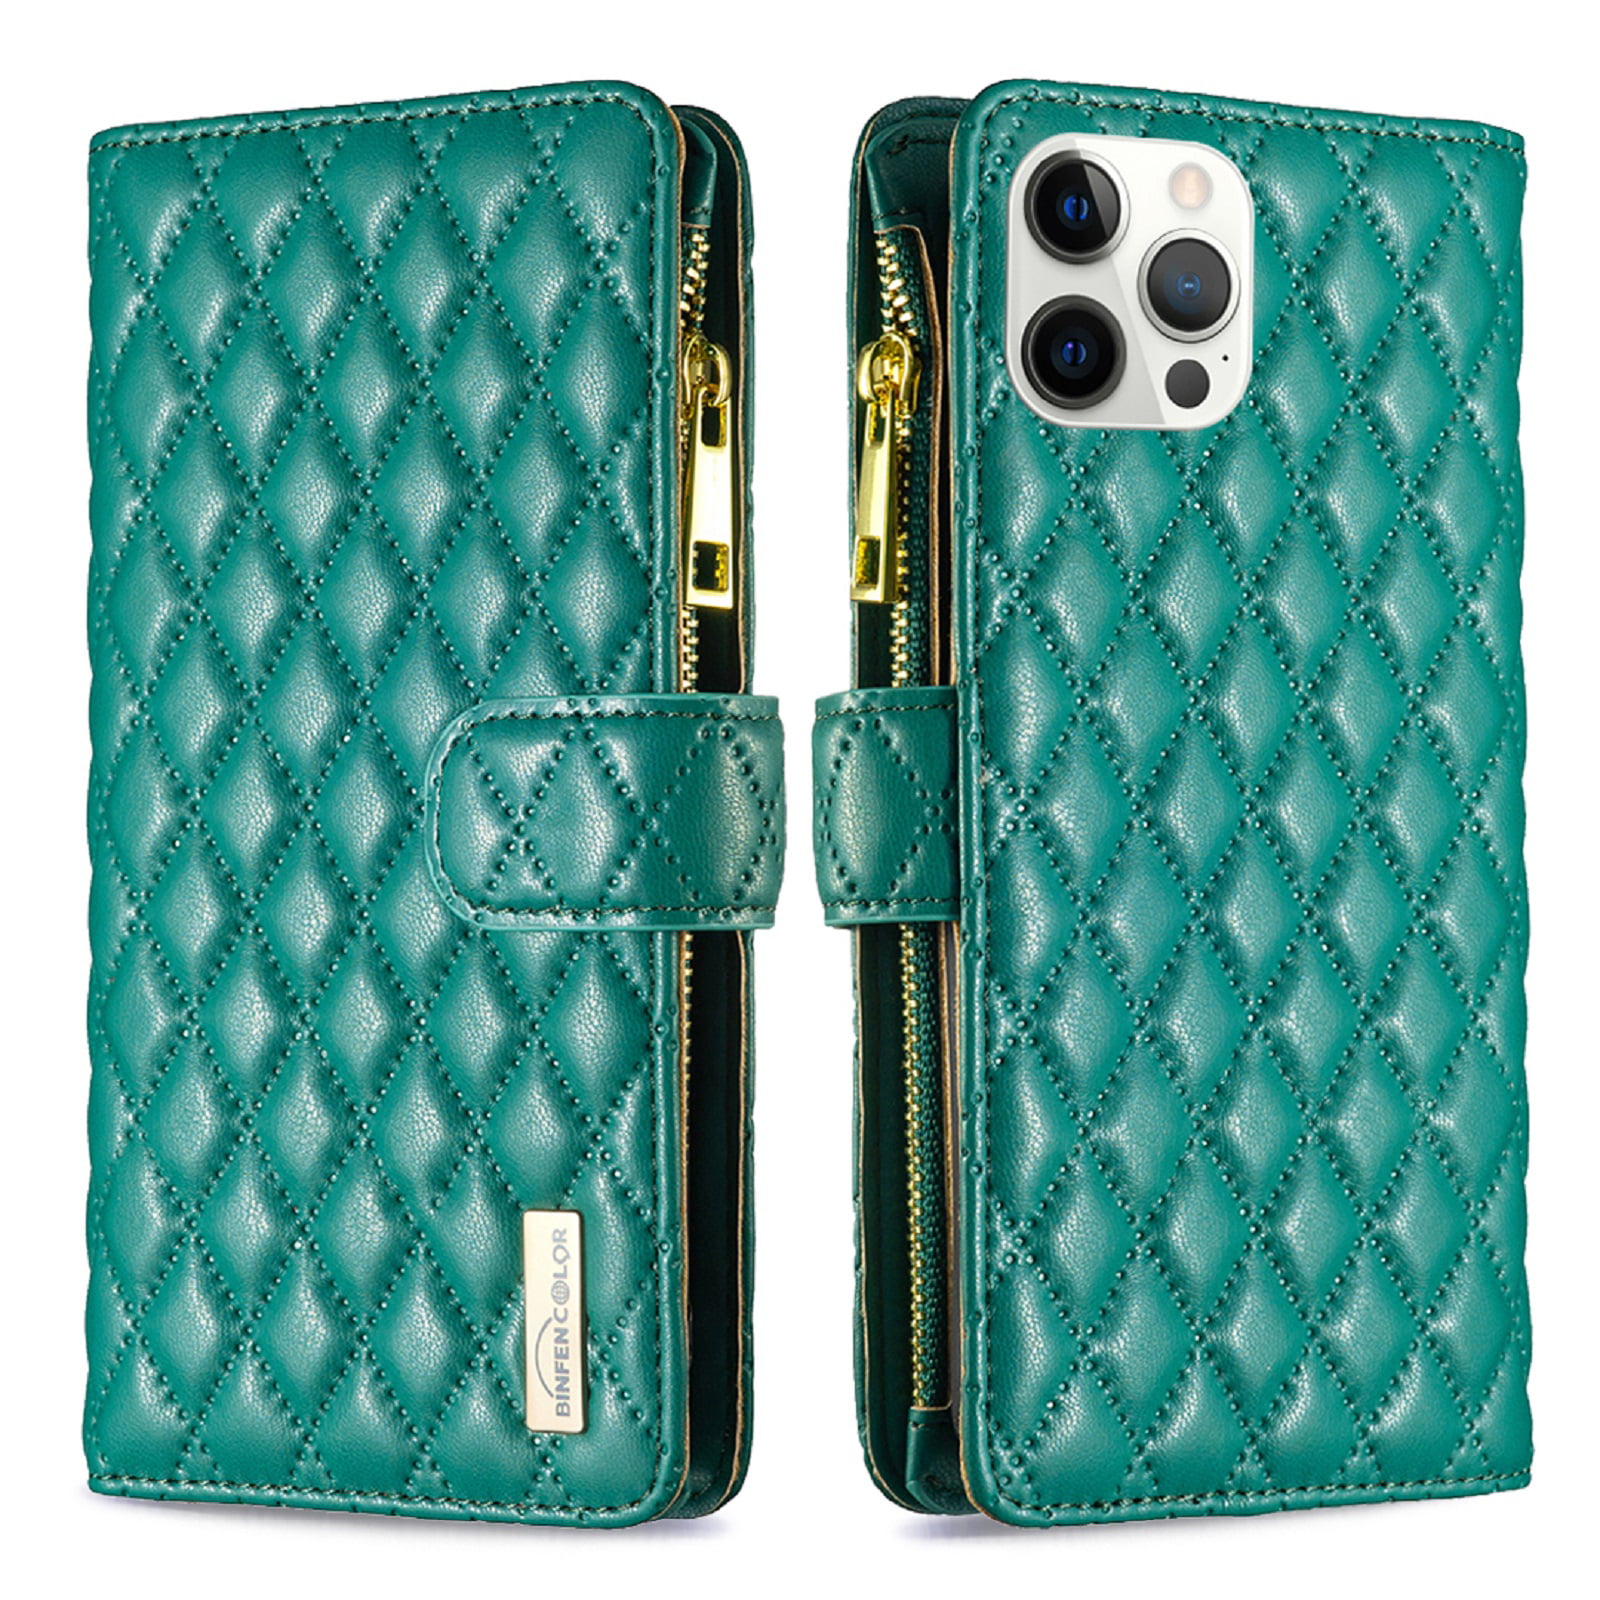 TECH CIRCLE Zipper Wallet case for iPhone 12 Pro Max, Stylish Argyle  Pattern PU Leather Wallet case with Handstrap Kickstand Card Slots Magnetic  Closure Shockproof Case For iPhone 12 Pro Max,Green 